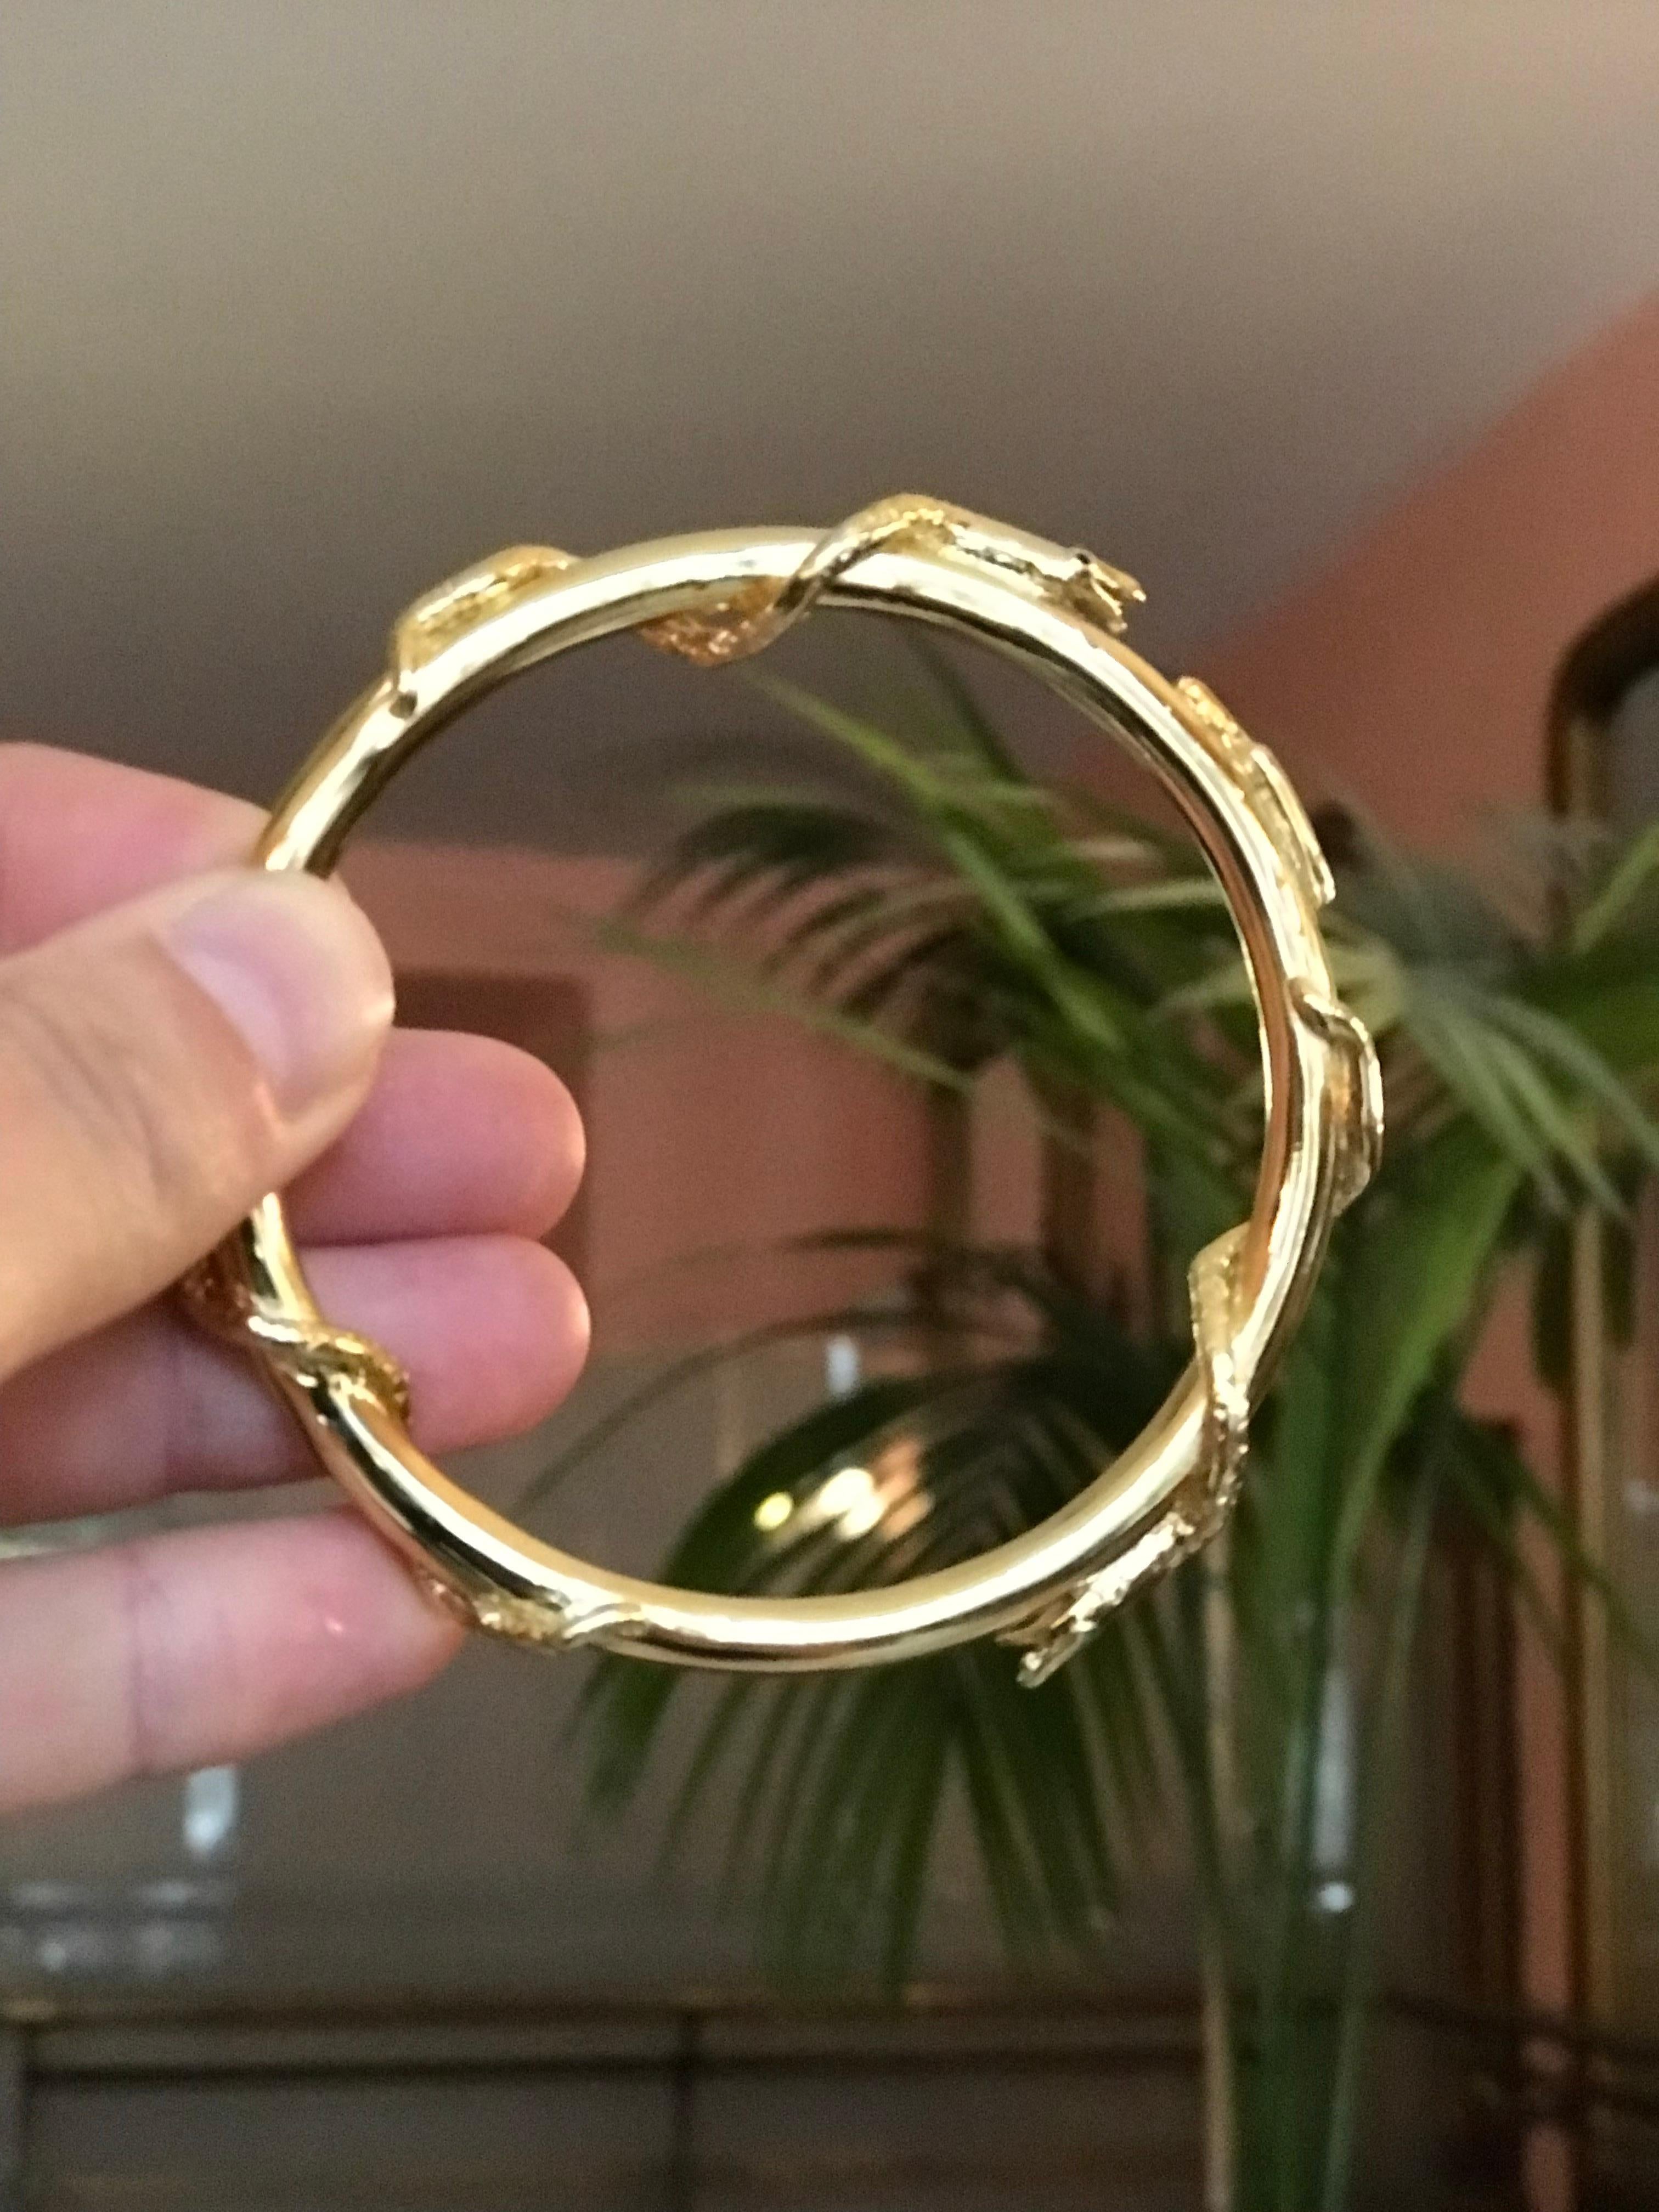 Women's Snake Bangle Bracelet Victorian Style Gold Plated J Dauphin For Sale